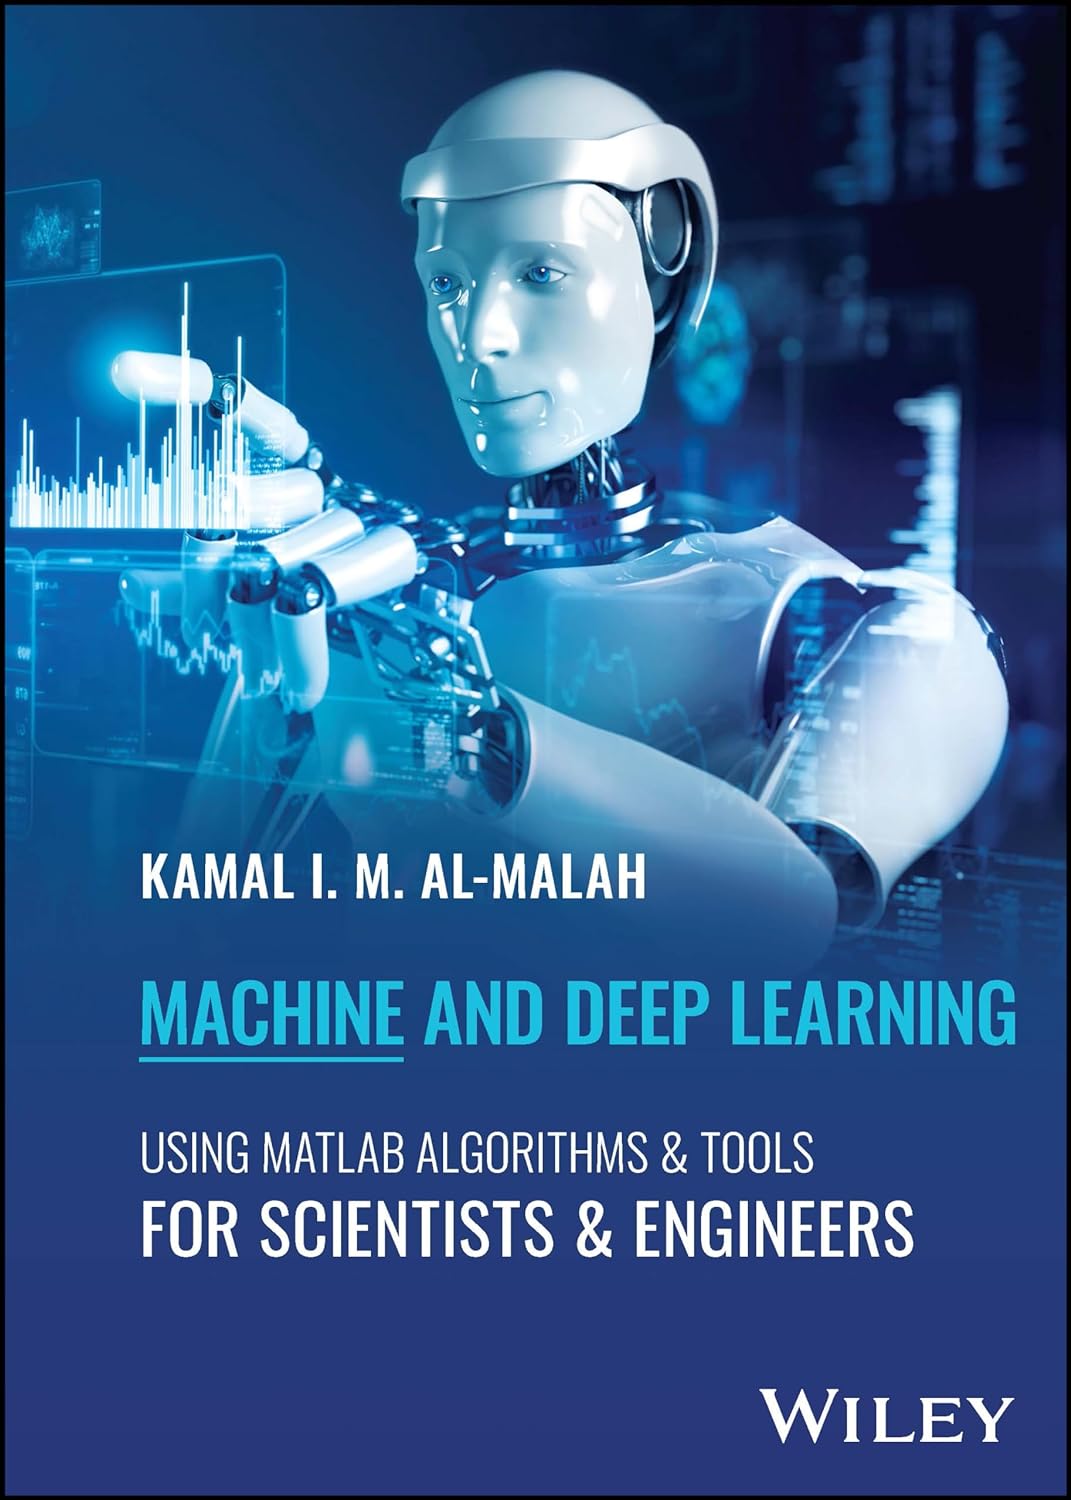 (EBook PDF)Machine and Deep Learning Using MATLAB: Algorithms and Tools for Scientists and Engineers by Kamal I. M. Al-Malah